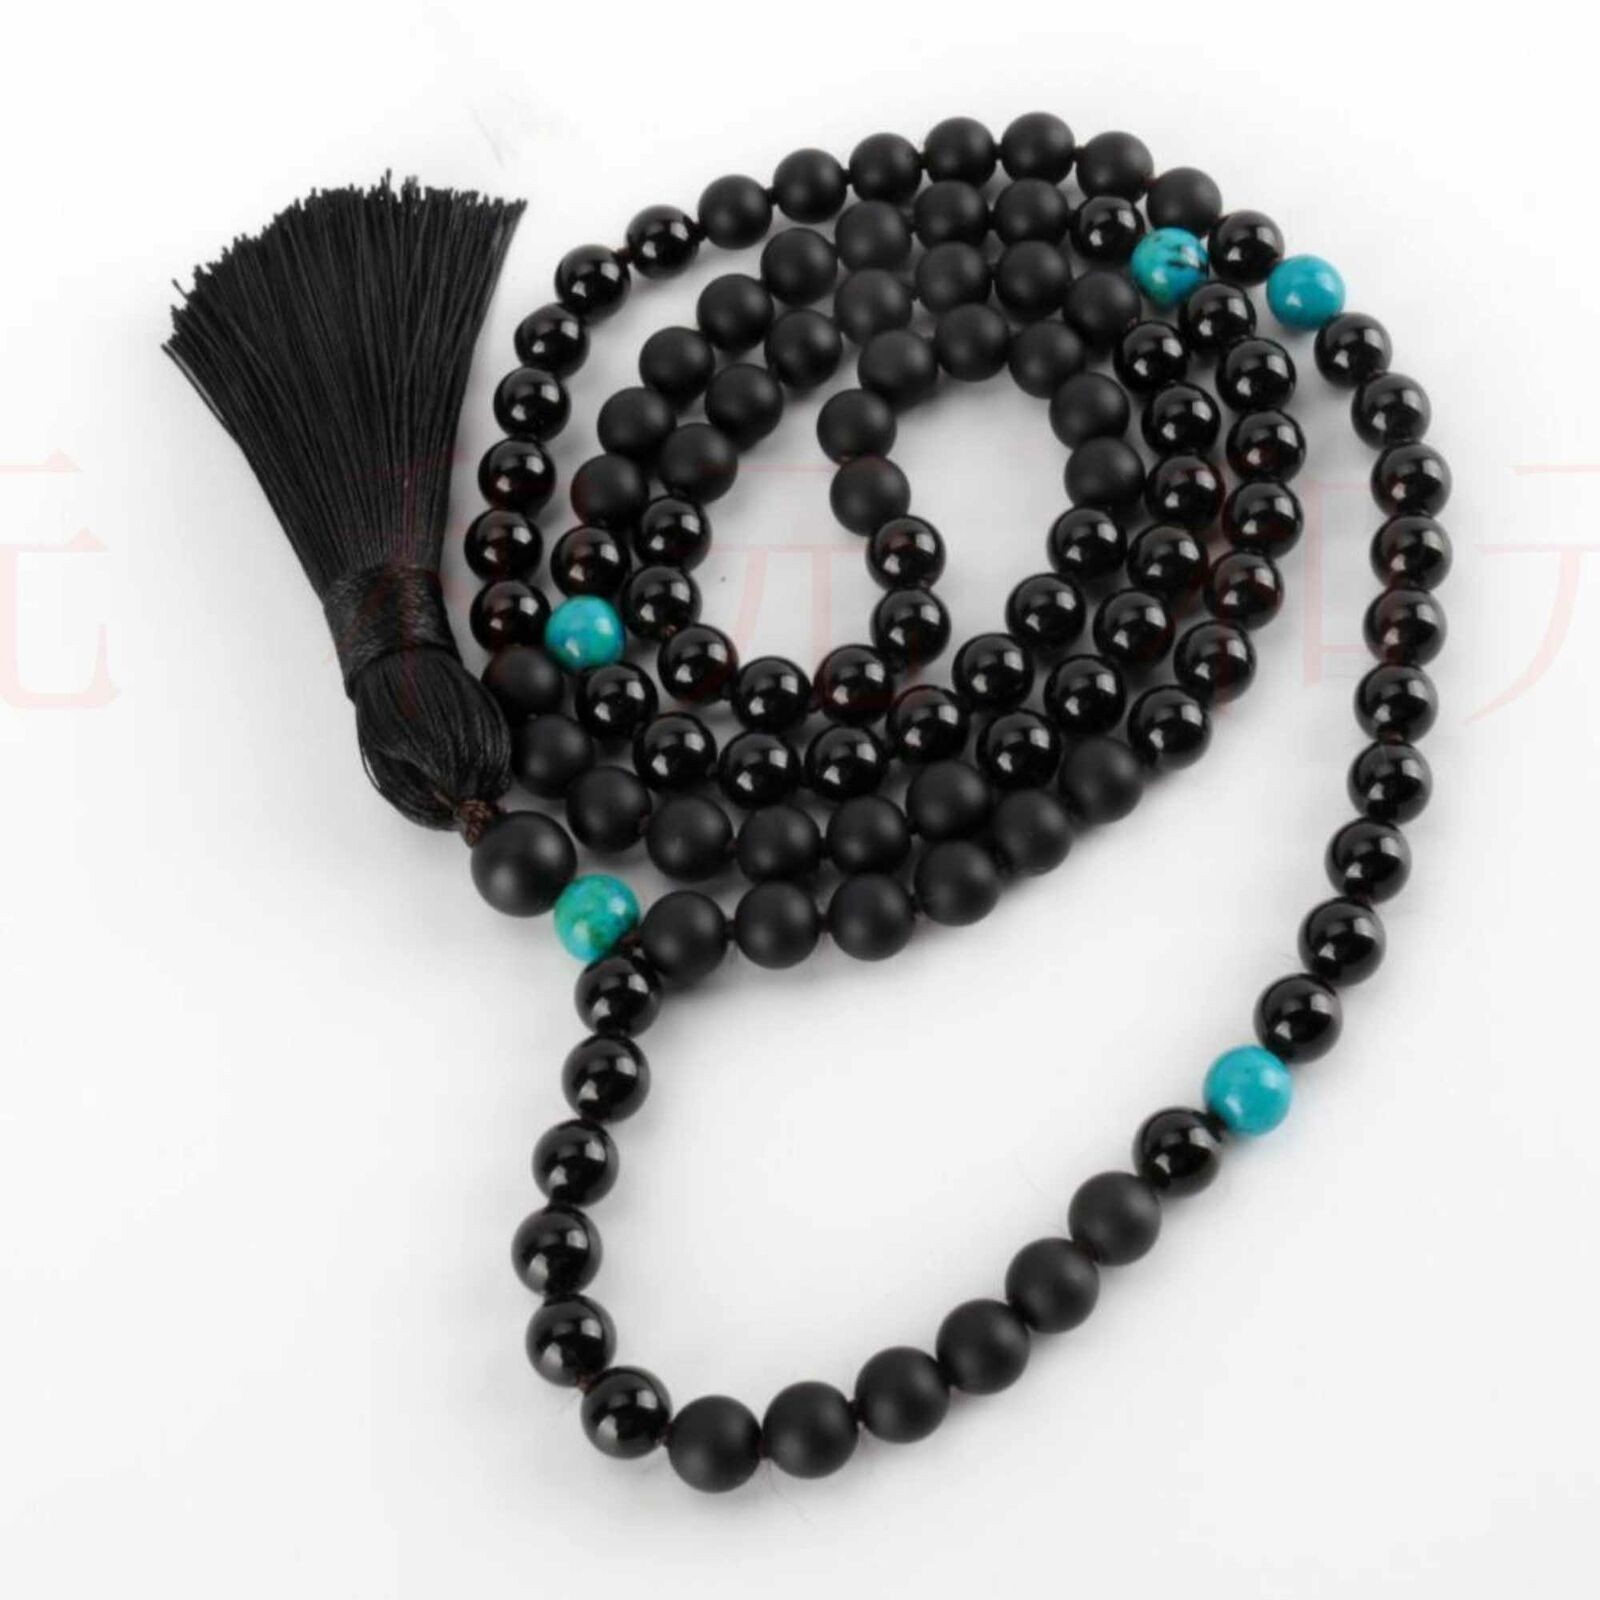 6mm 108 Natural black agate Lava  turquoise knot necklace Dark Matter Fancy